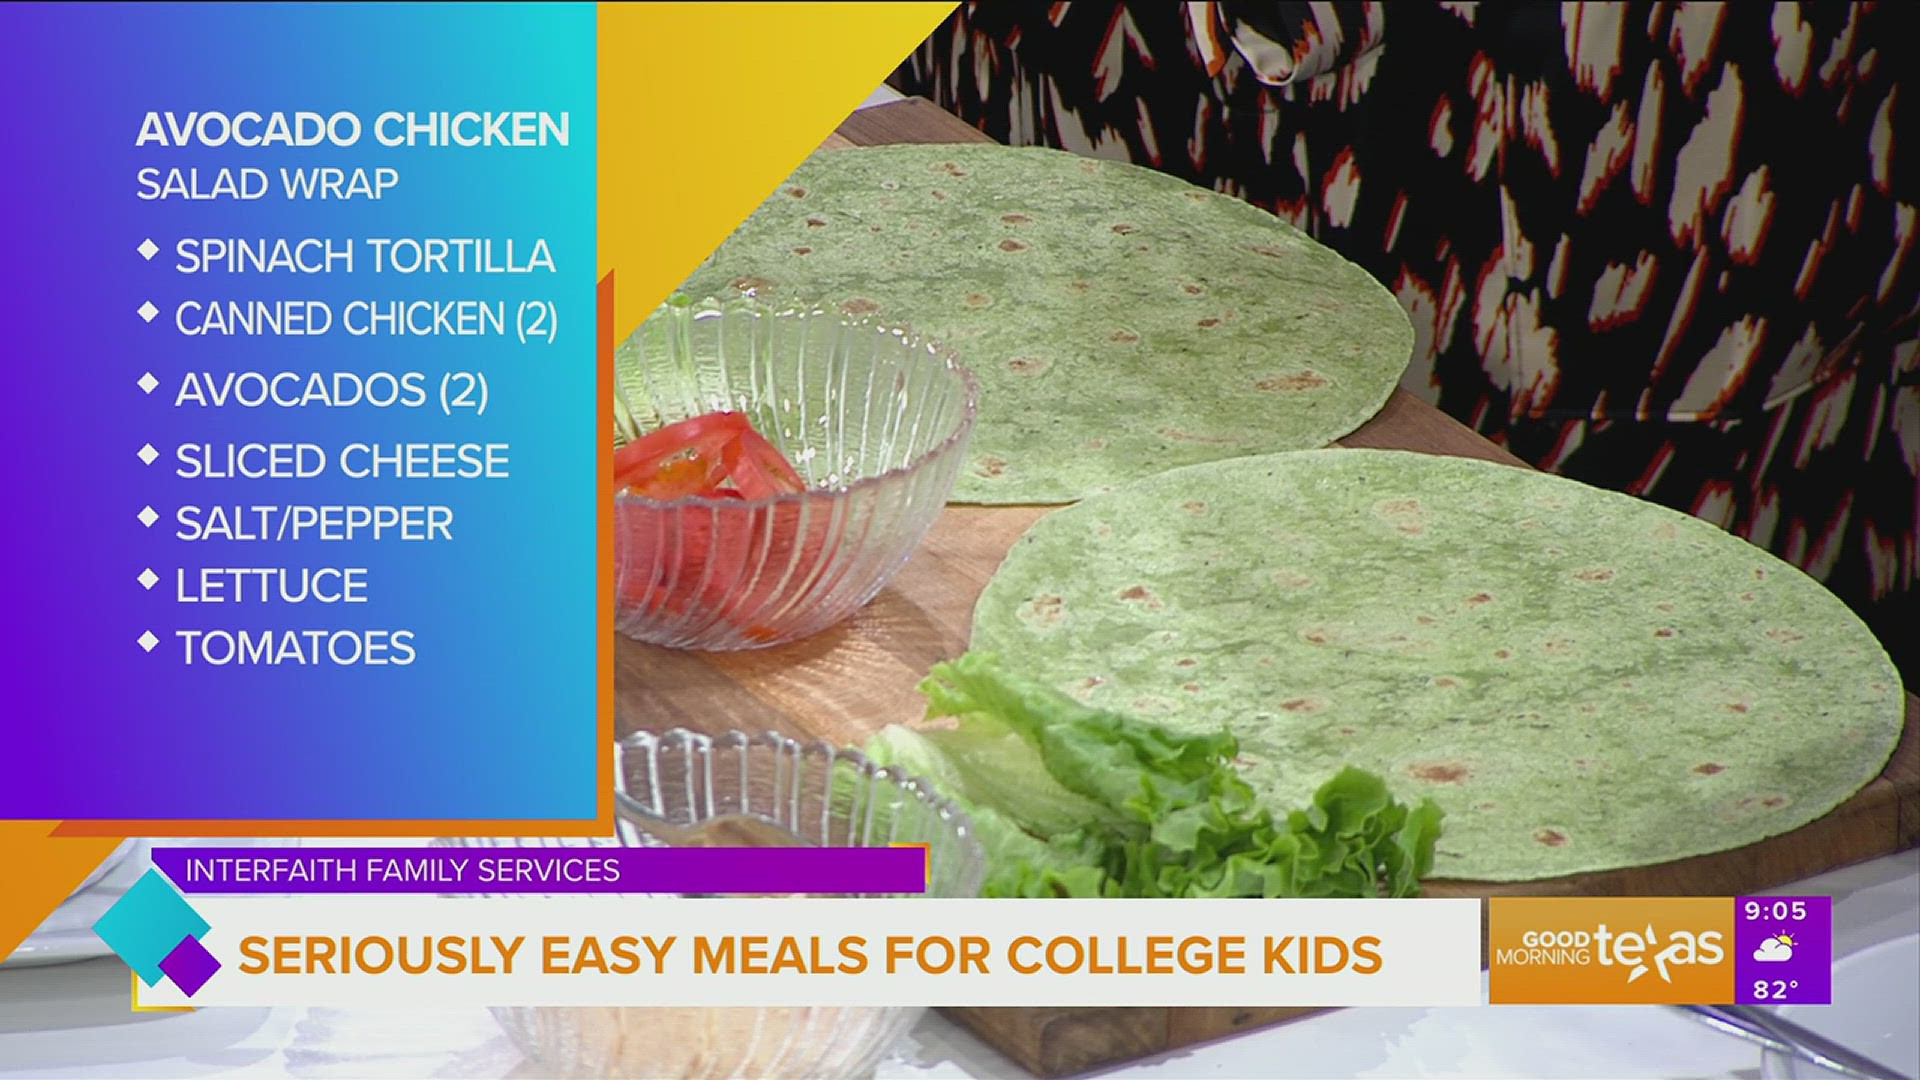 Sonia Williams with Interfaith Family Services shares three simple meal recipes for college bound students